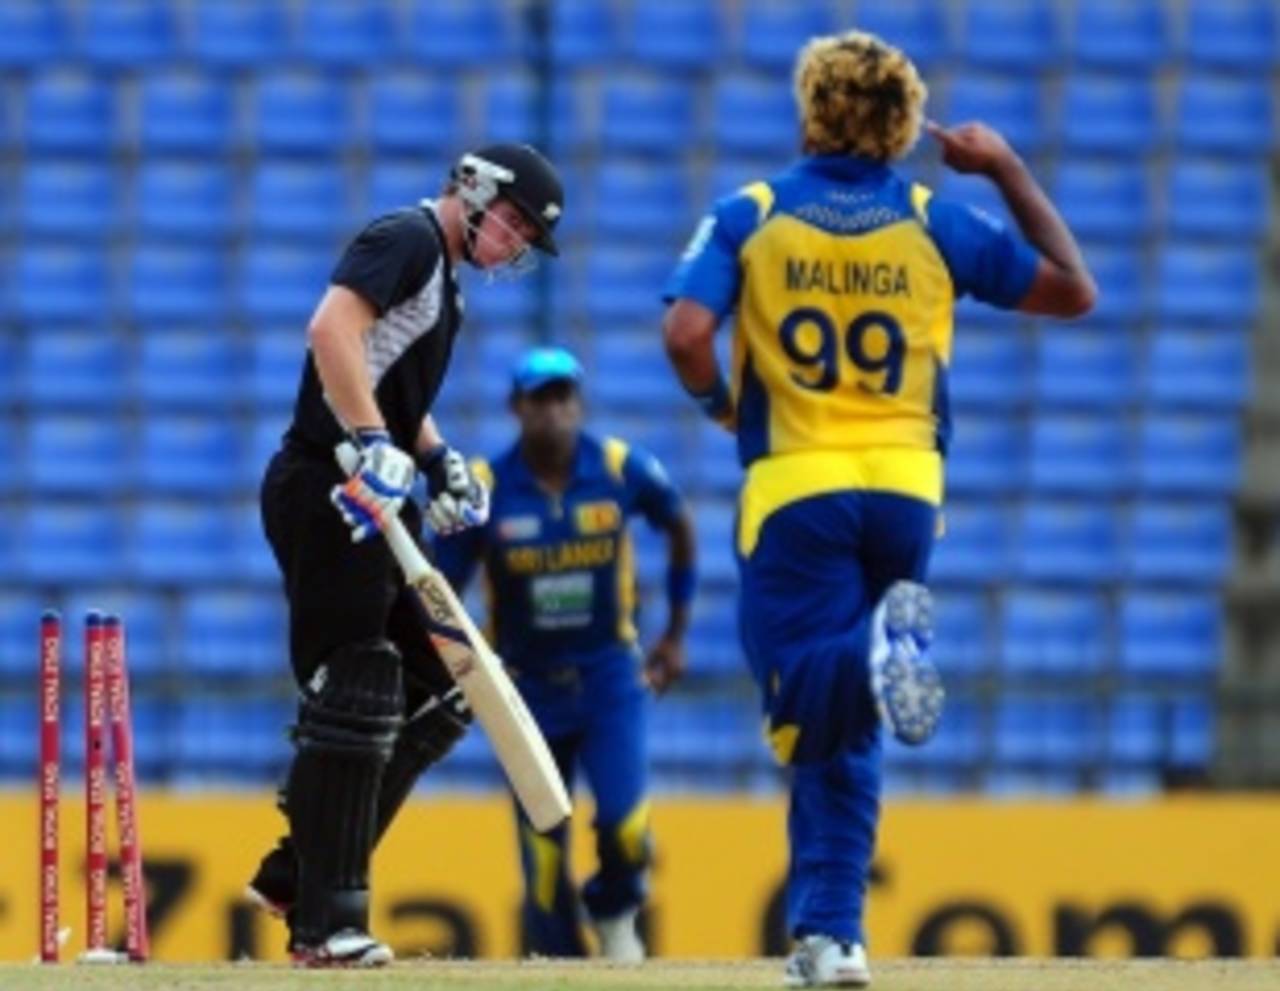 He failed in the World Twenty20 final, prompting much criticism but on Monday he again showed why he's such a prized asset for Sri Lanka&nbsp;&nbsp;&bull;&nbsp;&nbsp;AFP